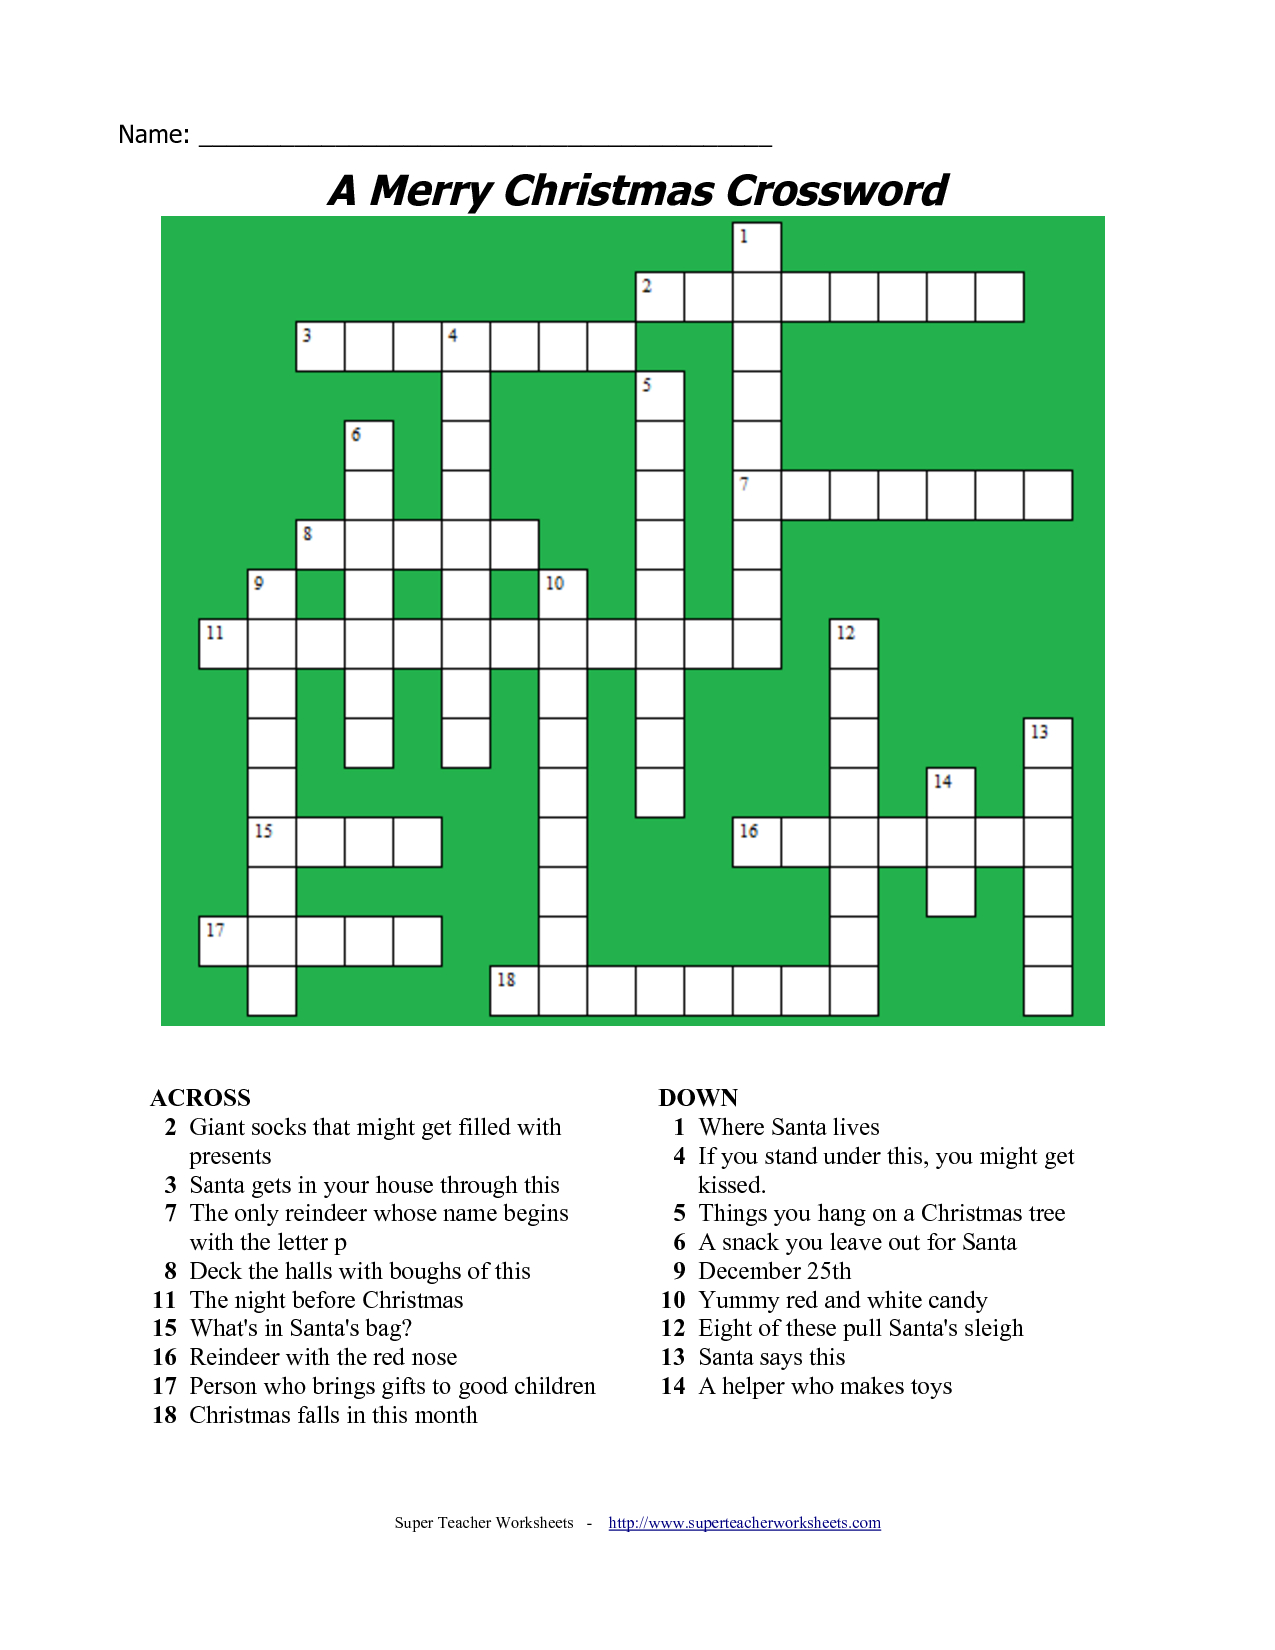 20 Fun Printable Christmas Crossword Puzzles | Kittybabylove - Printable Christmas Crossword Puzzle For Adults